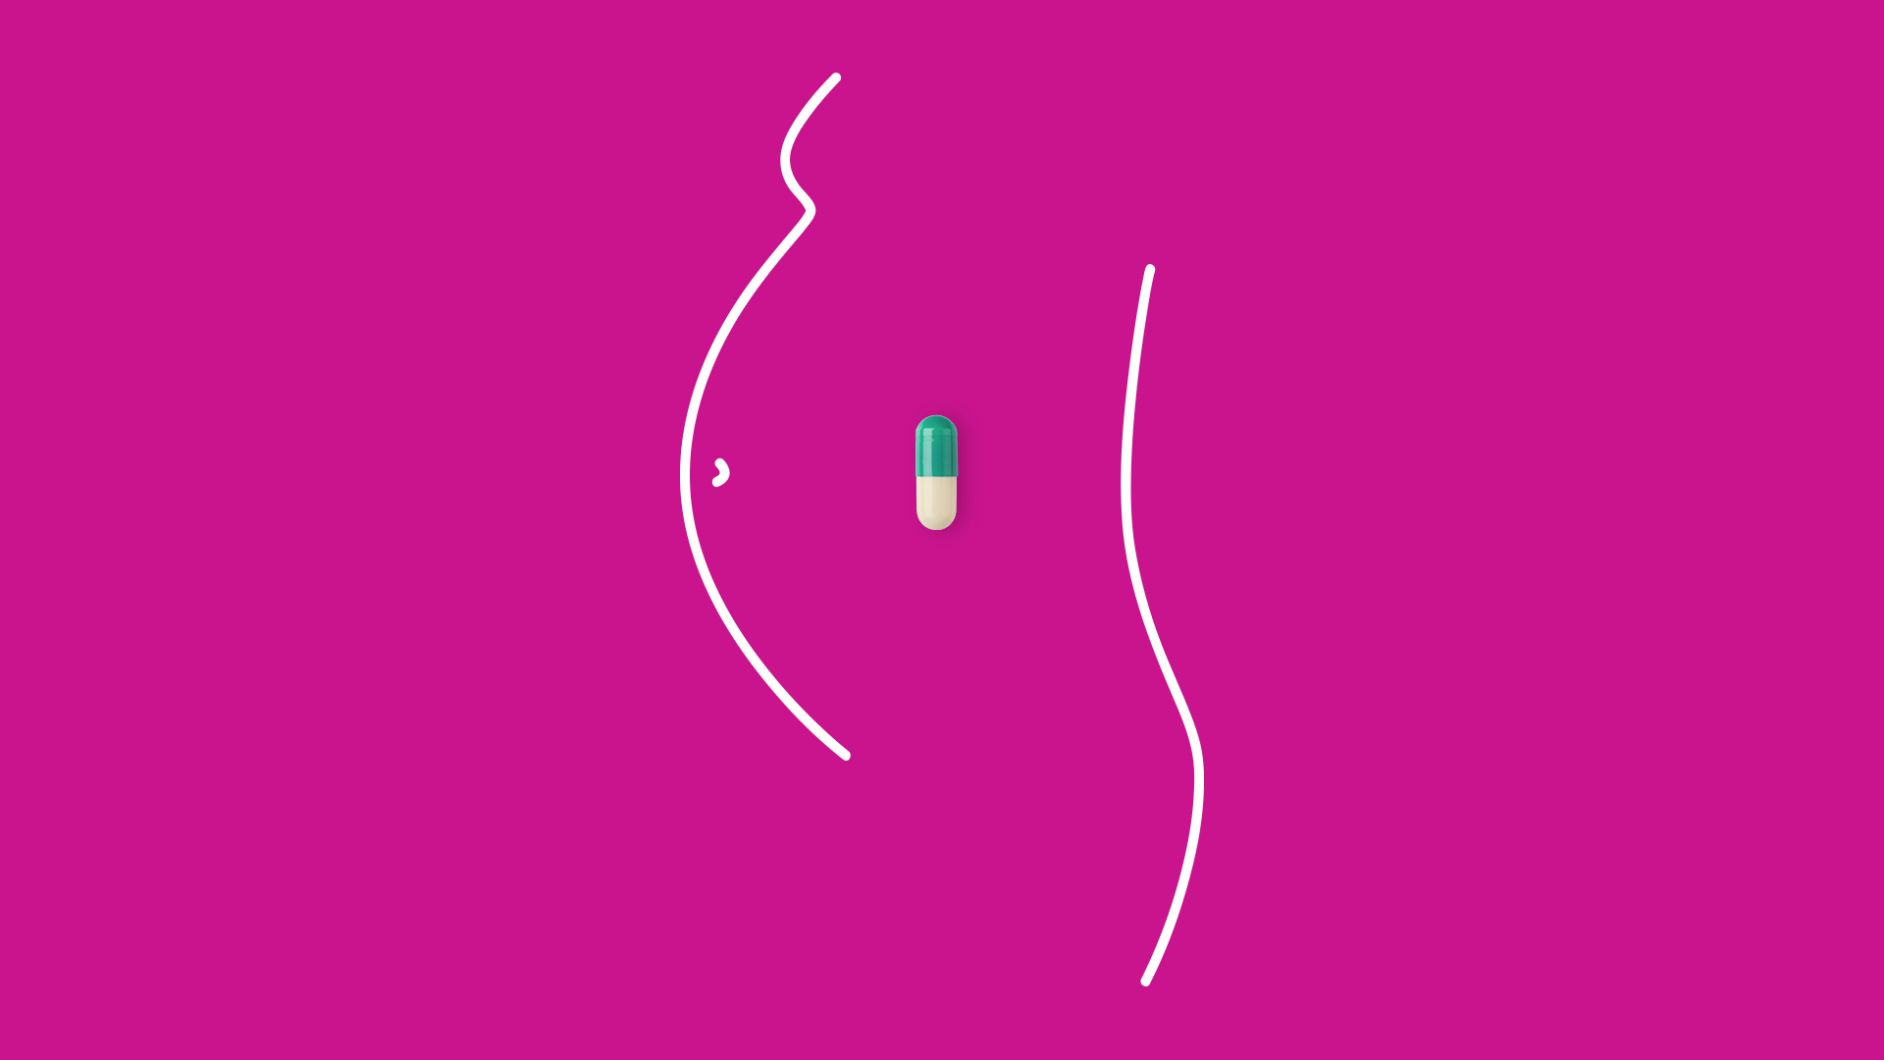 A pill inside the outline of a woman's stomach represent antidepressants and pregnancy.